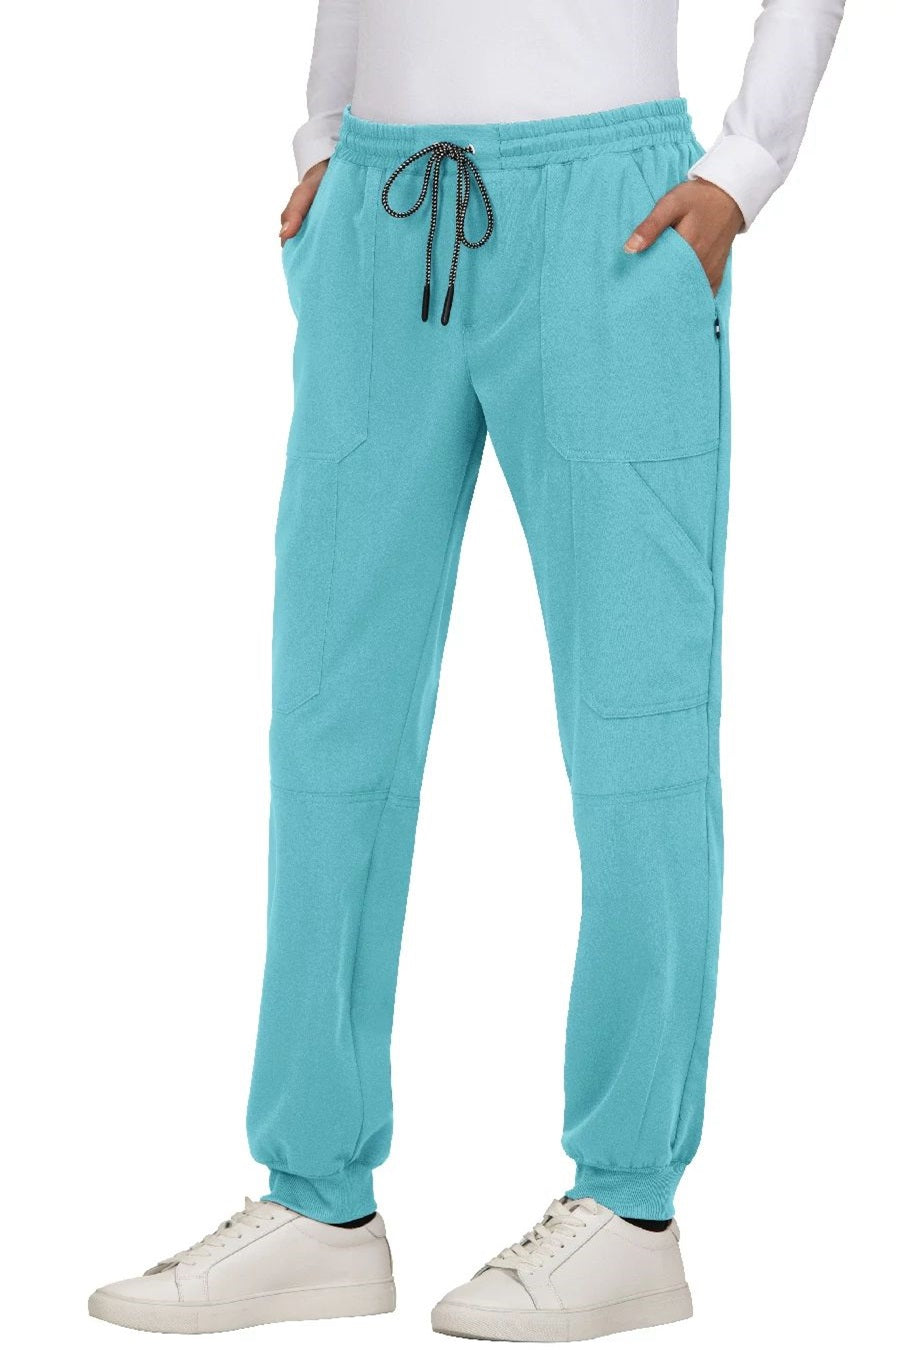 Koi Next Gen Good Vibe Jogger Pant Petite in Sea Glass at Parker's Clothing & Shoes.